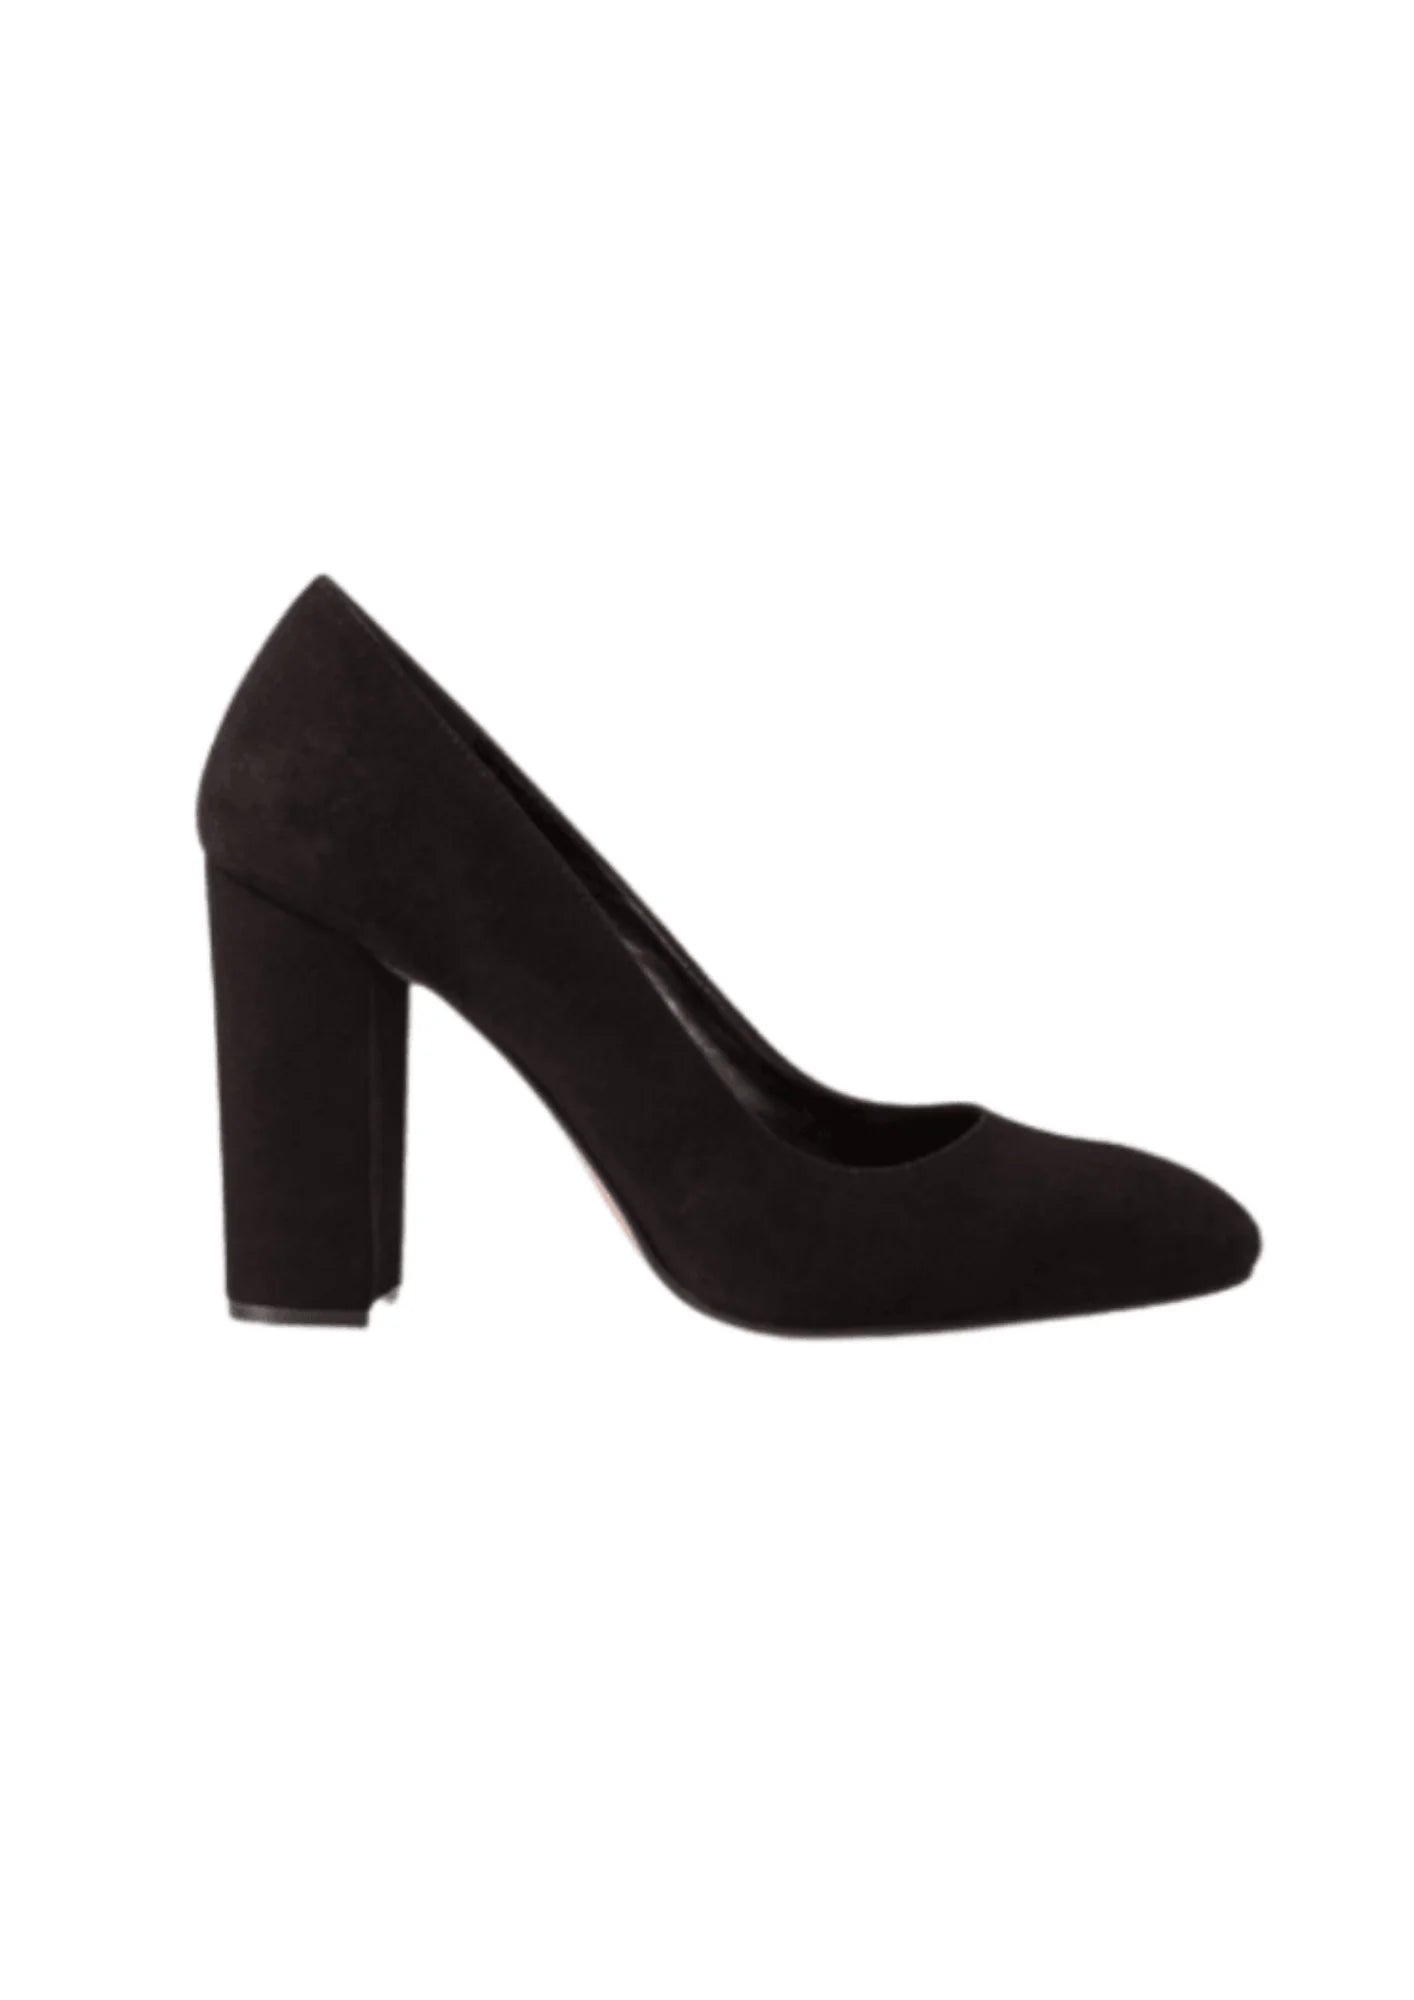 BLACK HIGH-HEELED SUZANNE SHOES